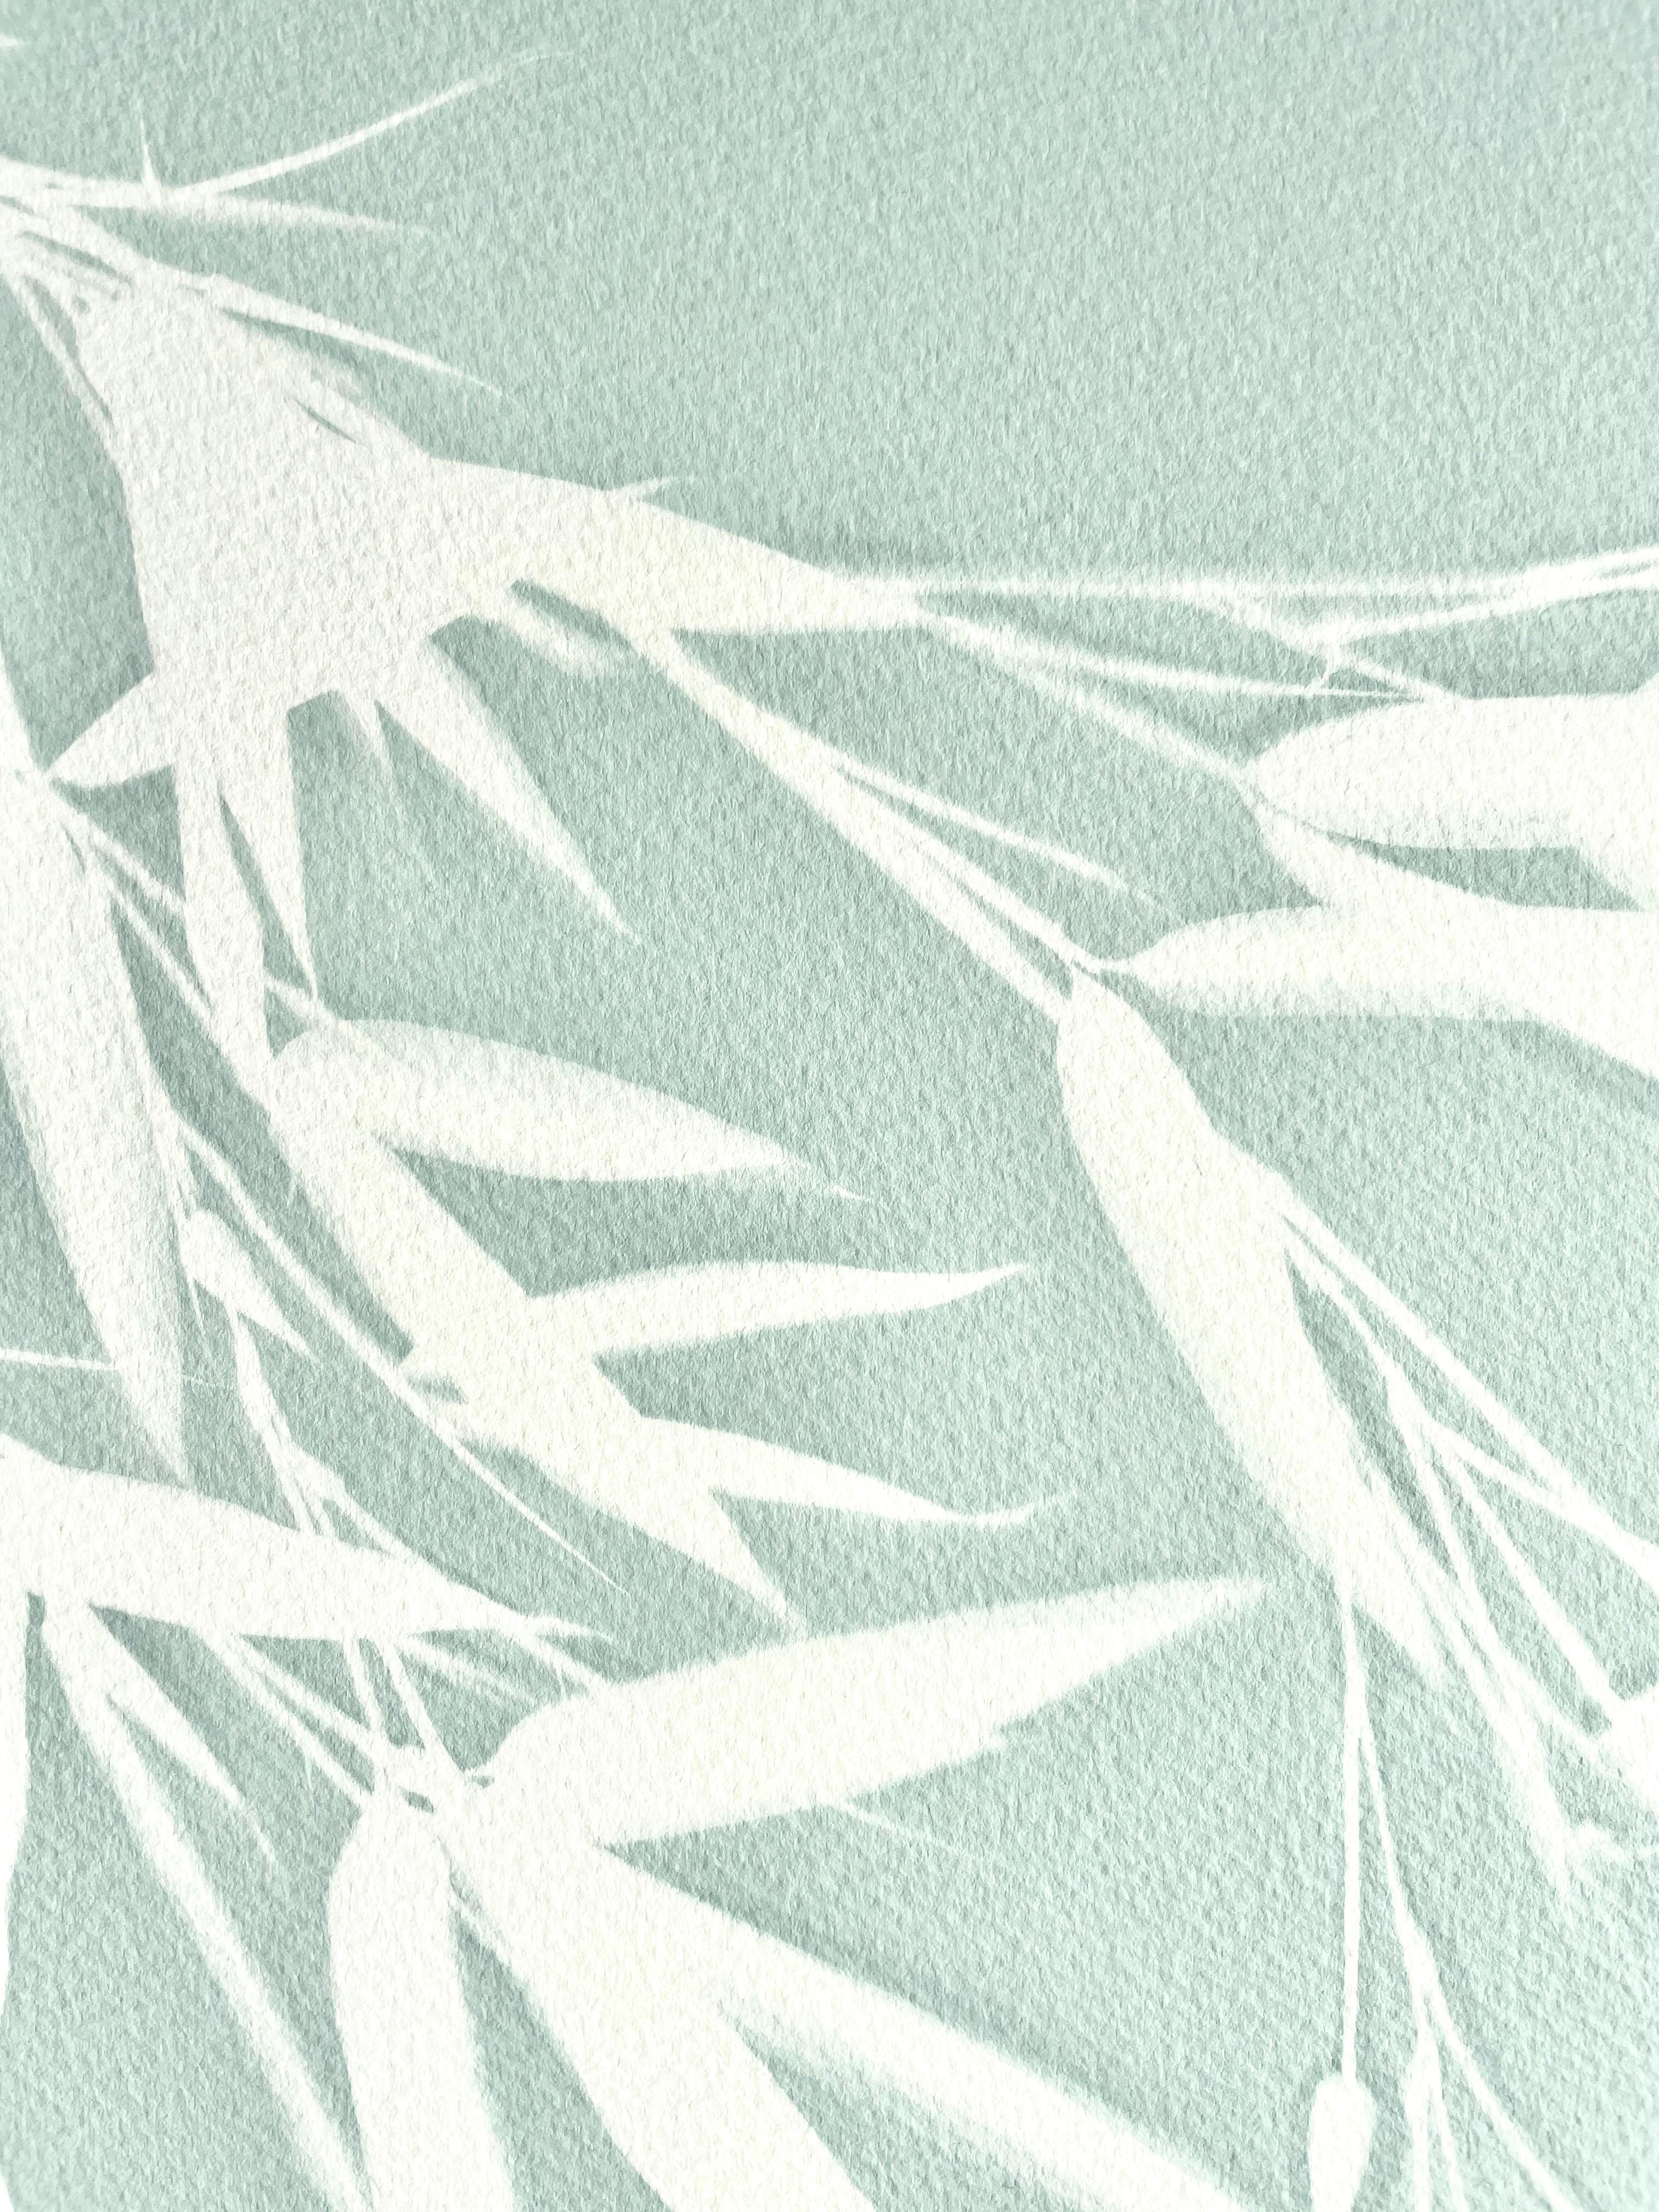 Celadon Bamboo (hand-printed botanical cyanotype, 24 x 18 inches) - Contemporary Photograph by Christine So